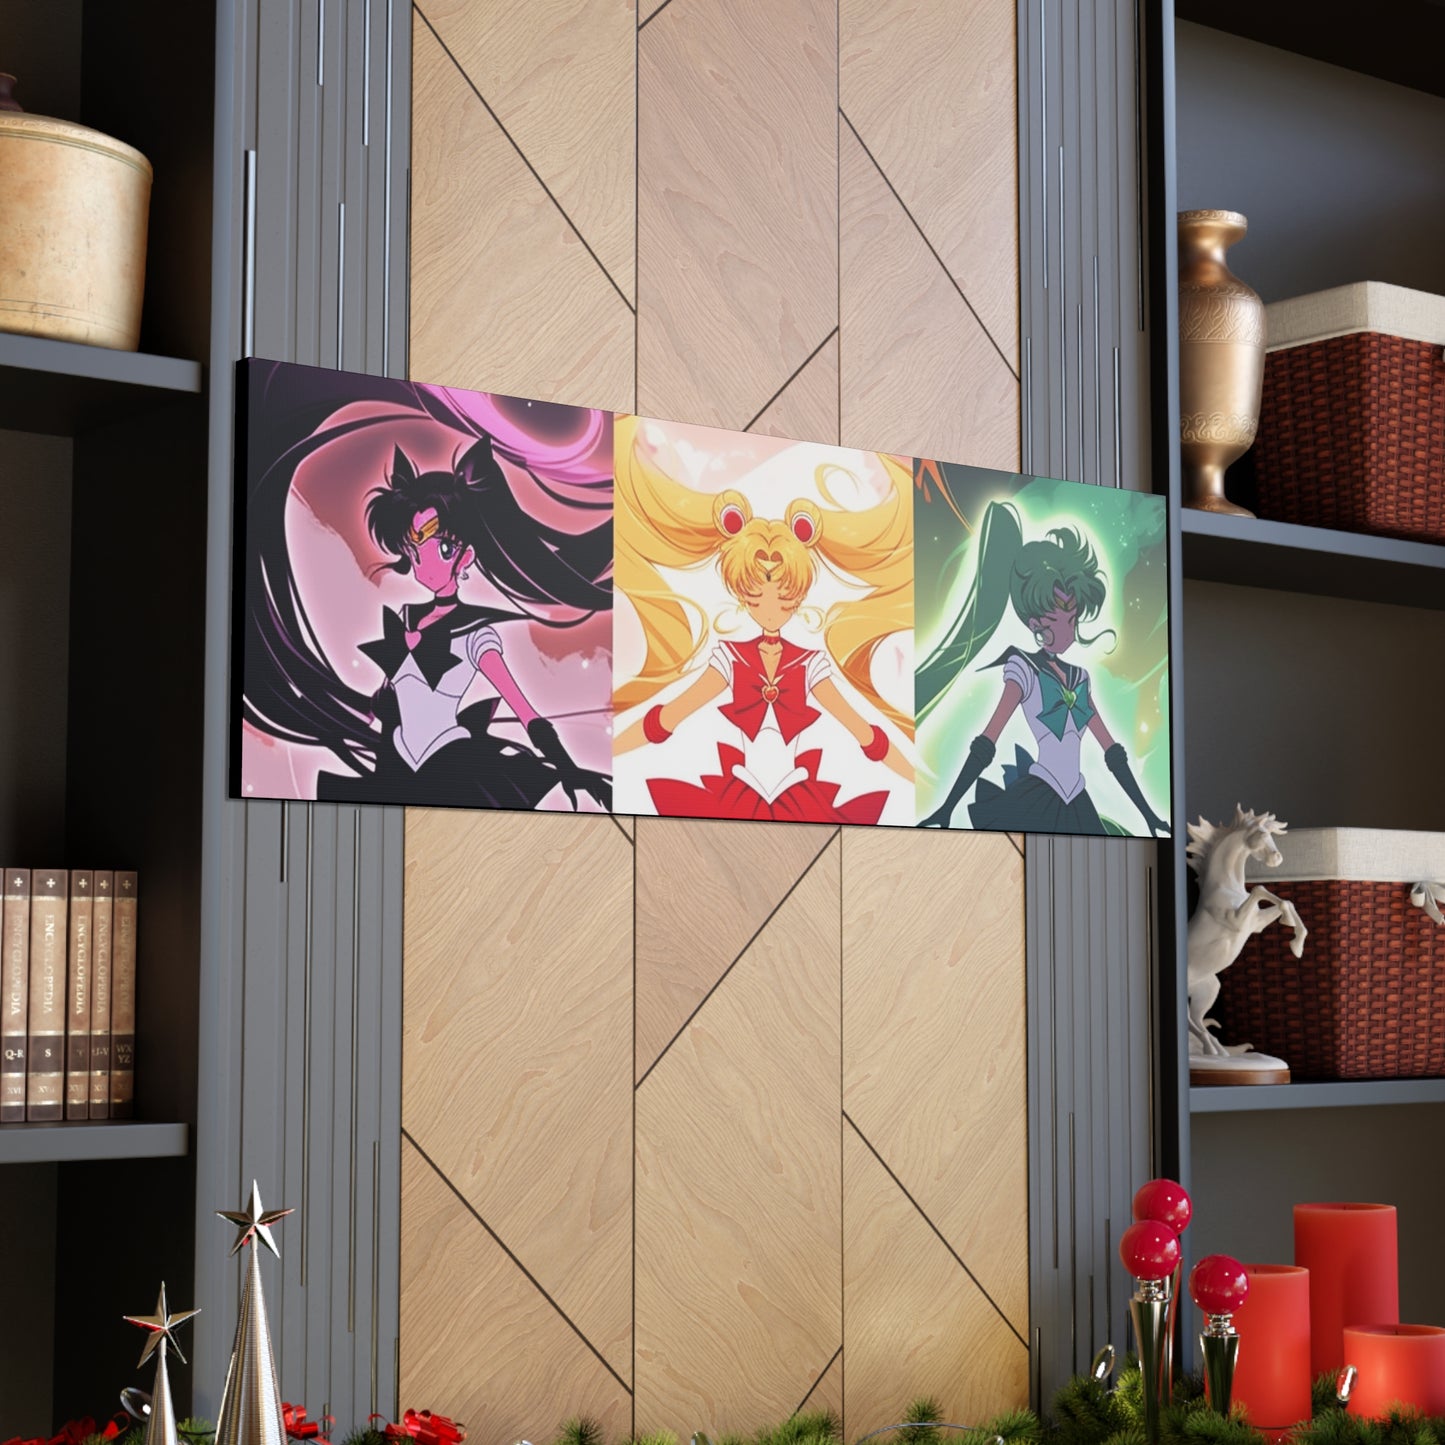 Sailor Scout Wall Canvas